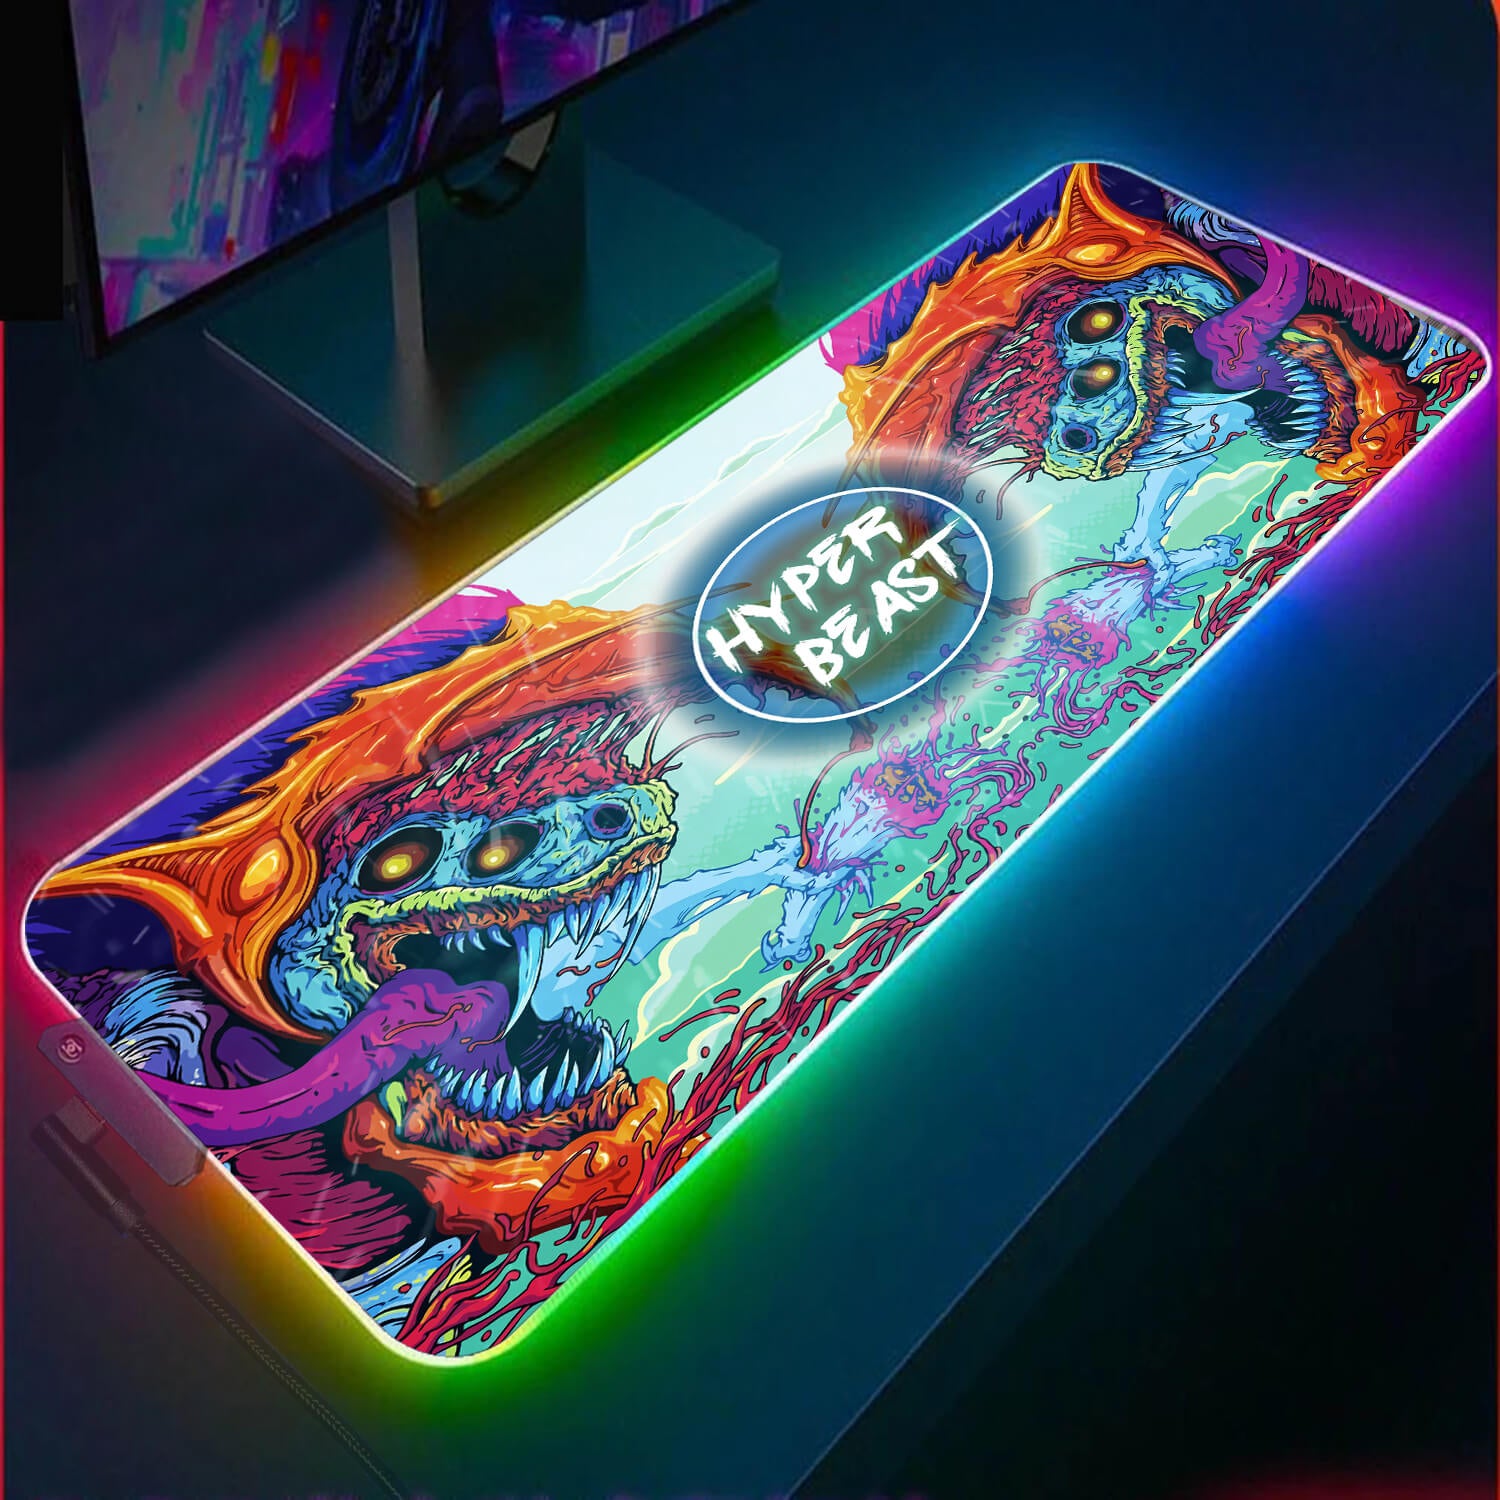 Hyper Beast LED Gaming Mouse Pad(2 patterns)